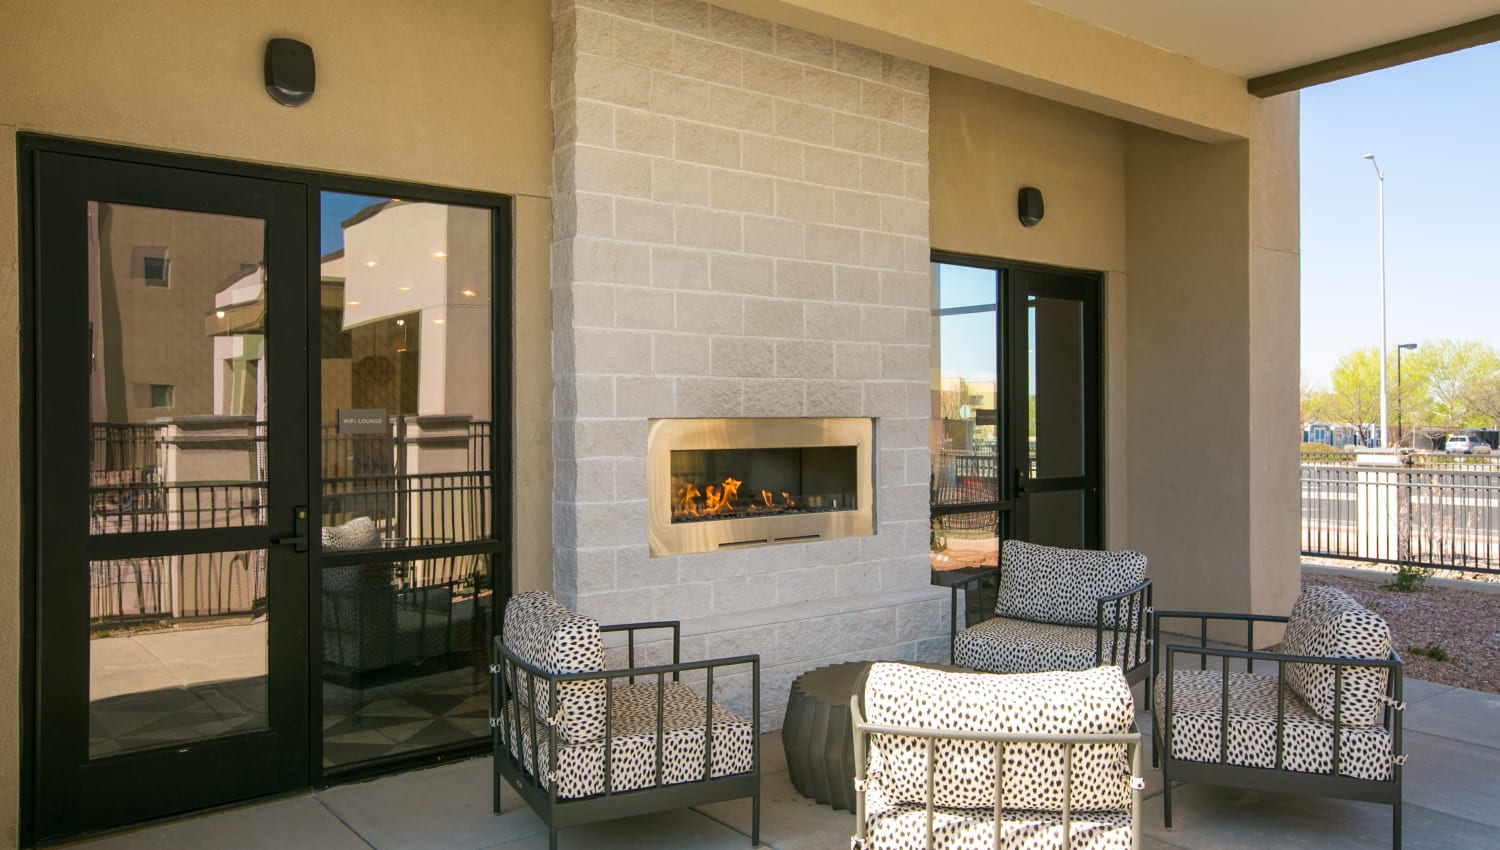 Clubhouse patio with outdoor fireplace at Olympus de Santa Fe, Santa Fe, New Mexico